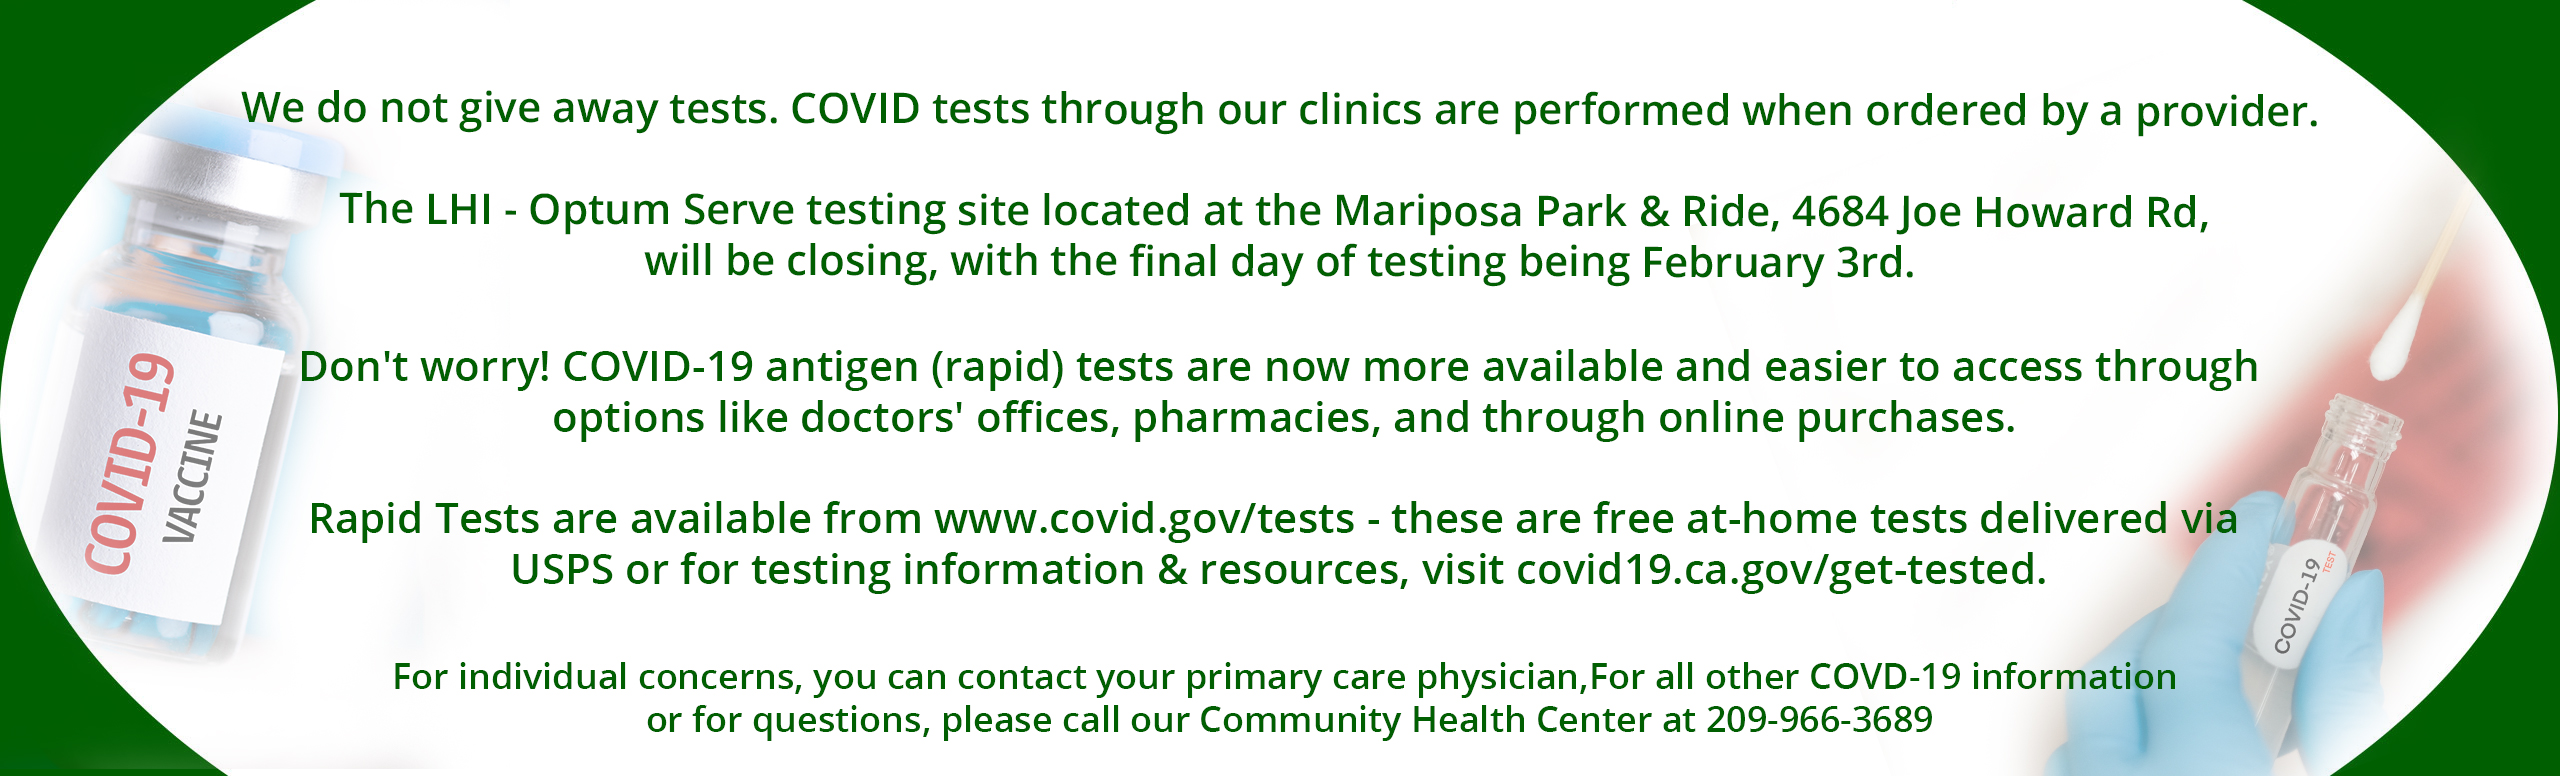 We do not give away tests. COVID tests through our clinics are performed when ordered by a provider.
 
The LHI - Optum Serve testing site located at the Mariposa Park & Ride, 4684 Joe Howard Rd, will be closing, with the final day of testing being February 3rd.

Don't worry! COVID-19 antigen (rapid) tests are now more available and easier to access through options like doctors' offices, pharmacies, and through online purchases.

Rapid Tests are available from www.covid.gov/tests - these are free at-home tests delivered via USPS or for testing information & resources, visit covid19.ca.gov/get-tested.

For individual concerns, you can contact your primary care physician.

For all other COVD-19 information or for questions, please call our Community Health Center at 209-966-3689